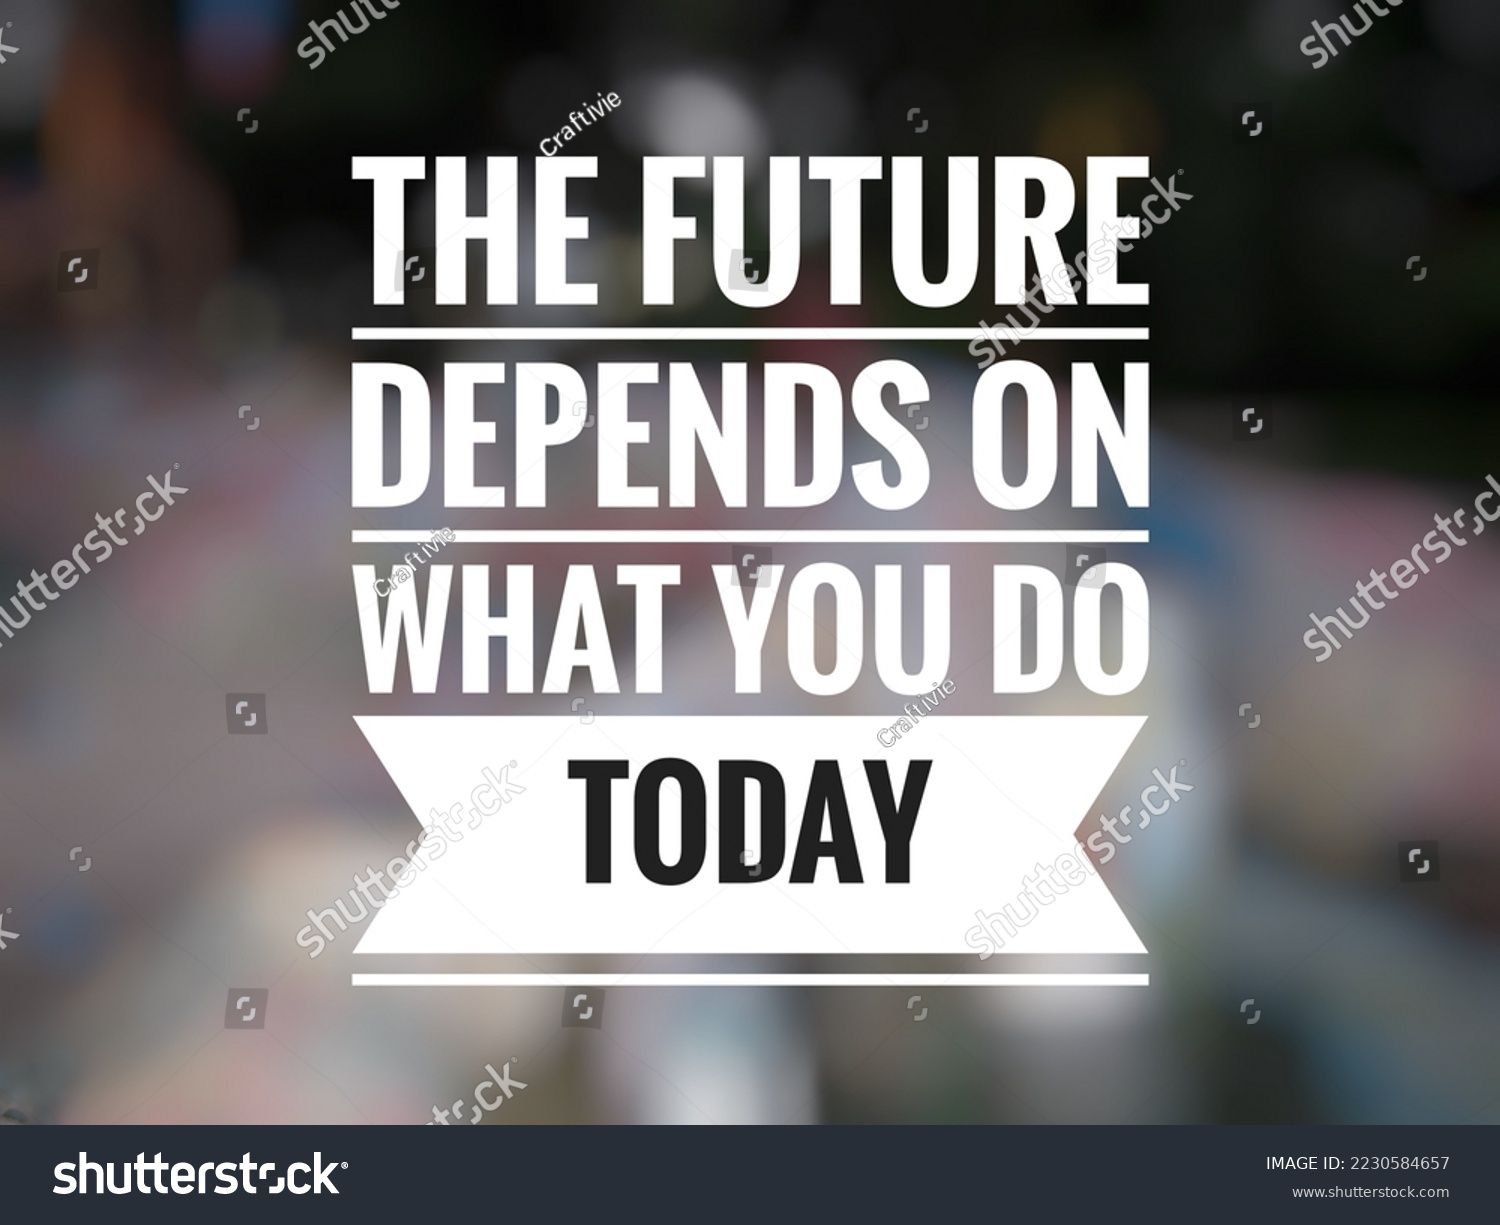 Motivational quote "The future depends on what you do today" on abstract blurred background. #2230584657